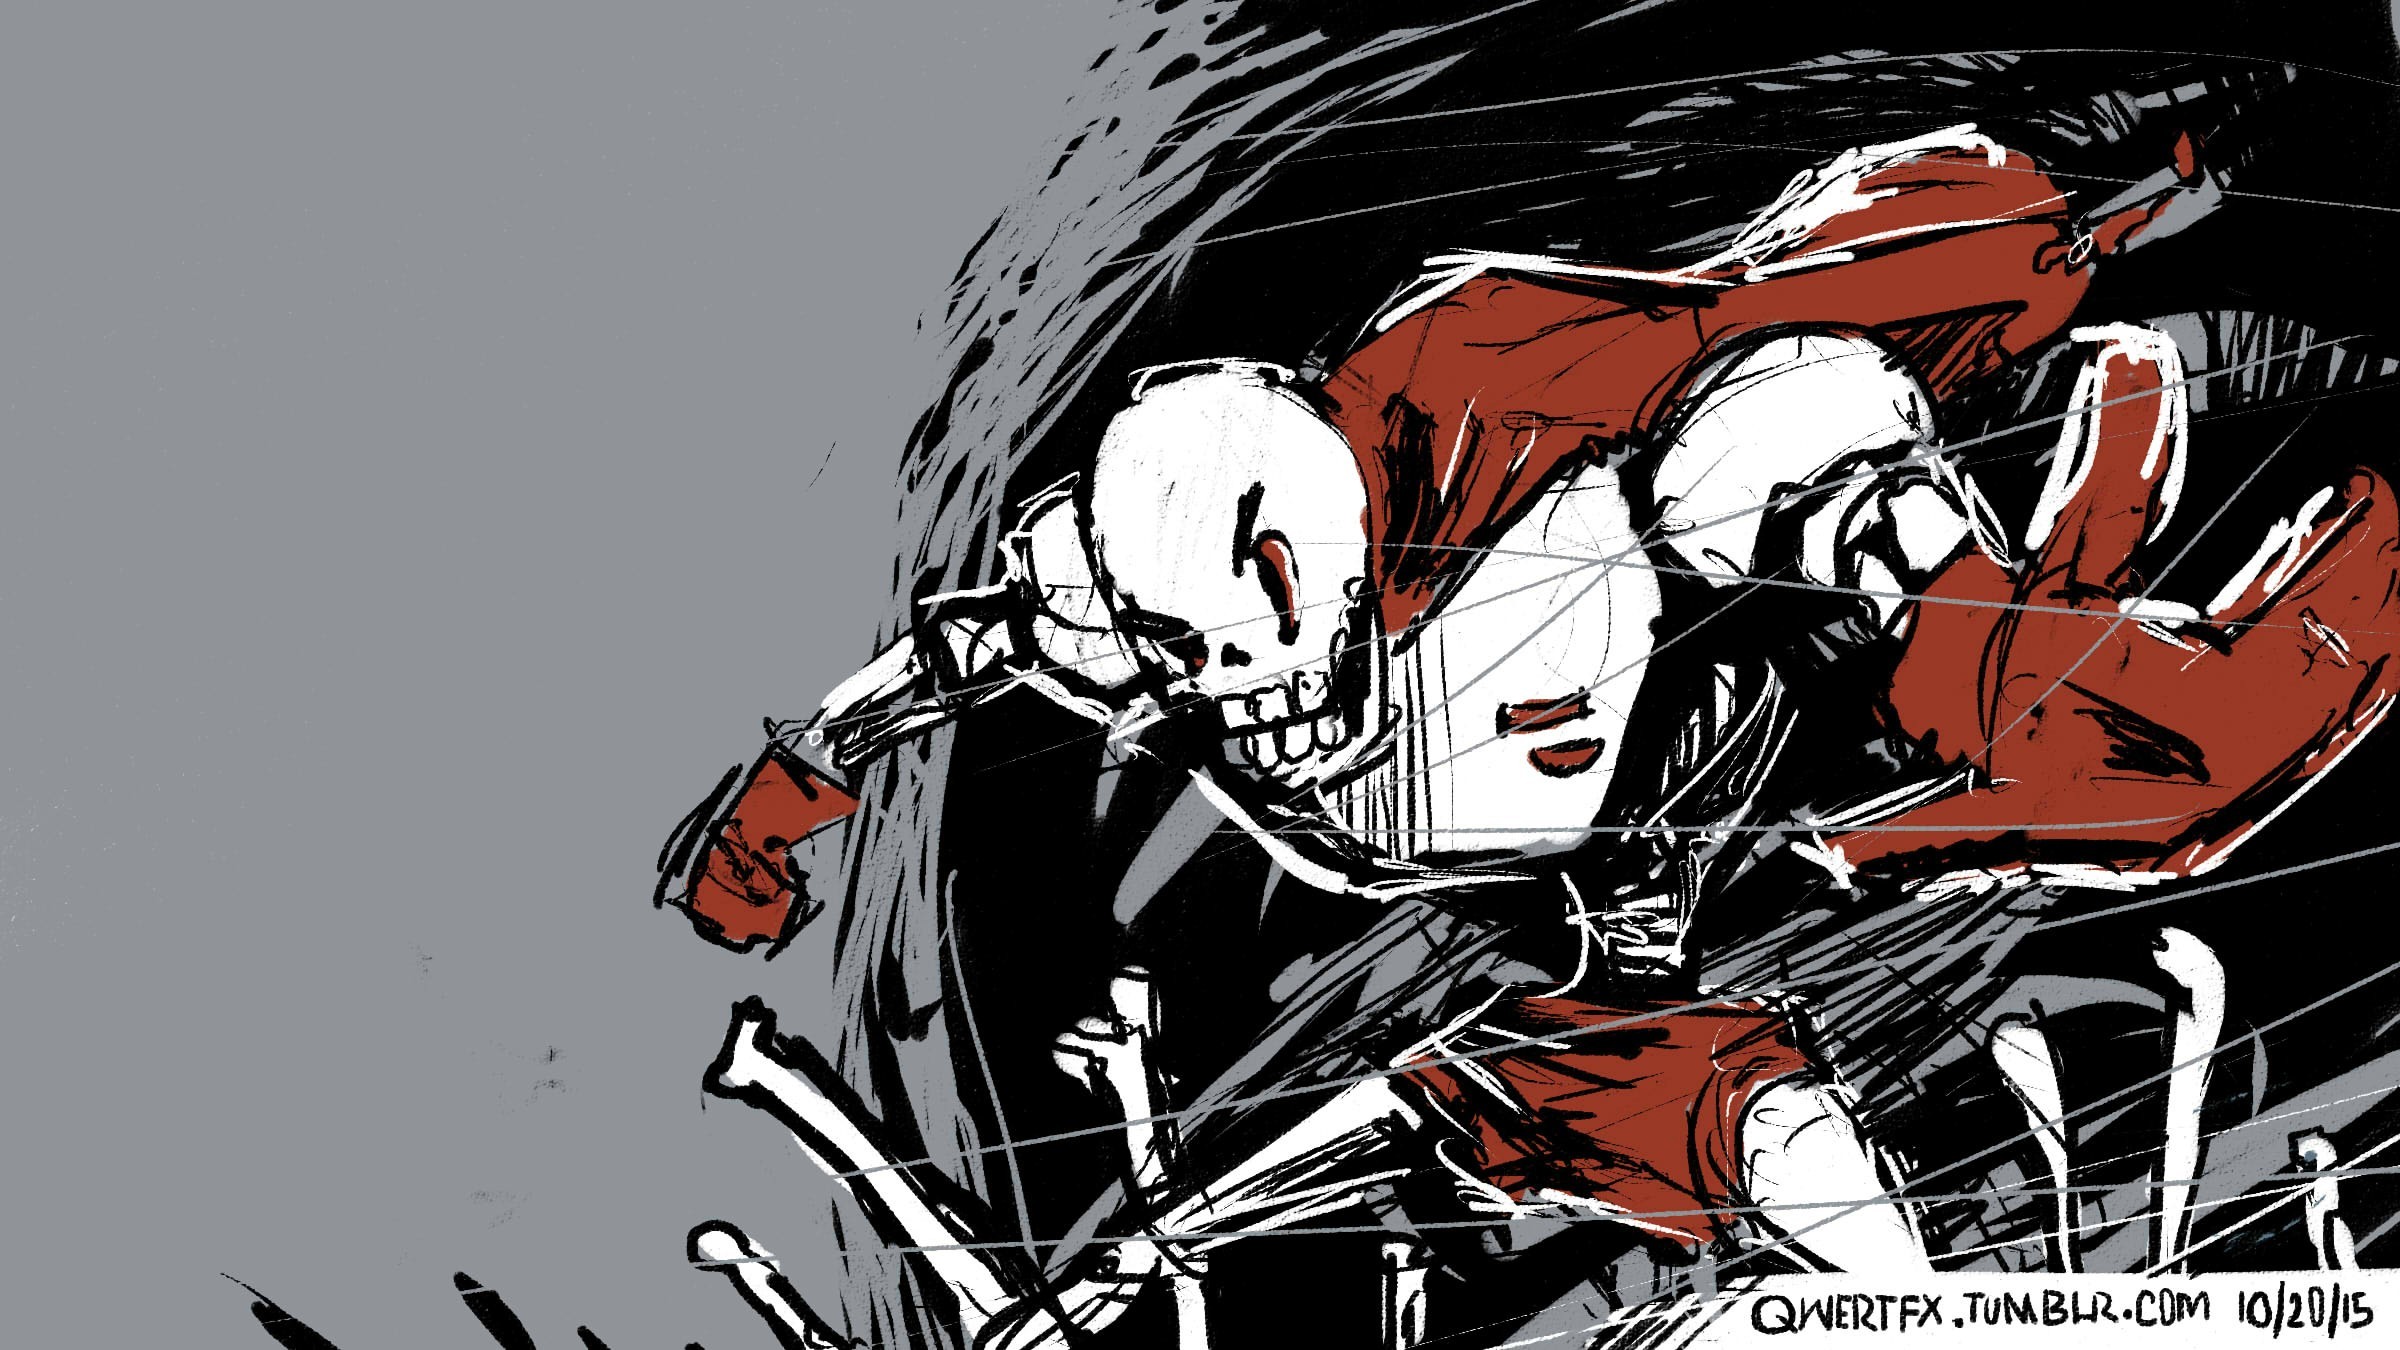 Undertale Papyrus wallpaper ·① Download free beautiful High Resolution